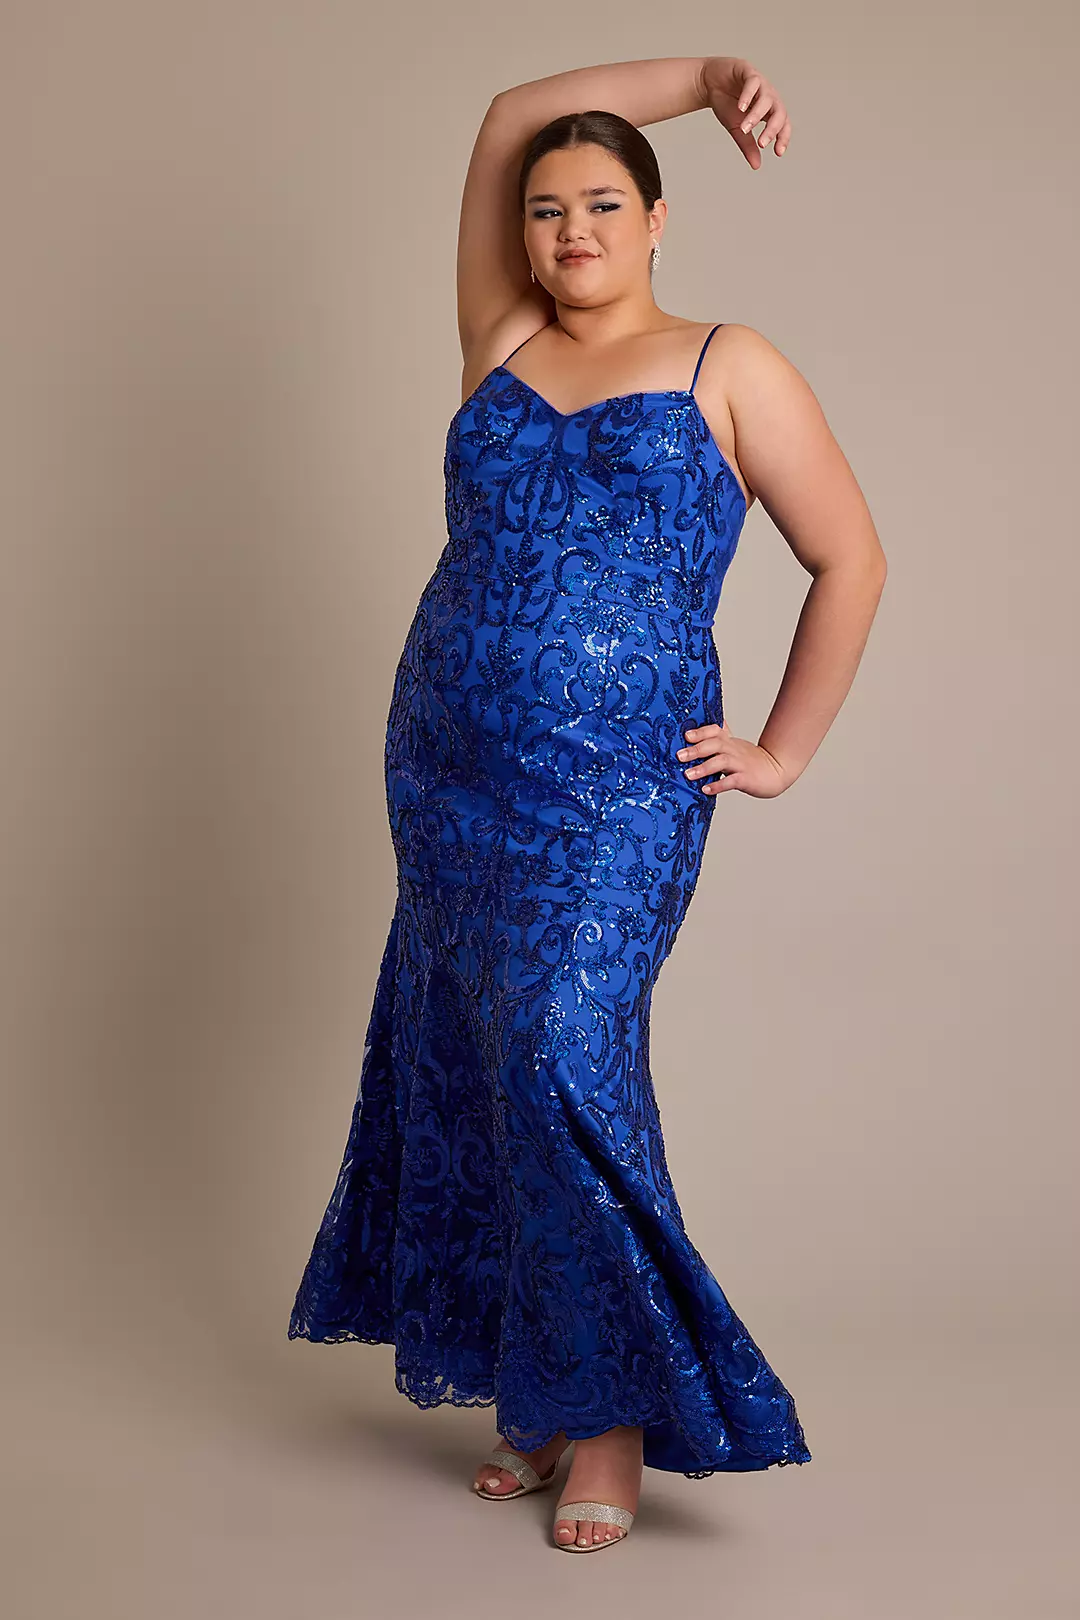 Patterned Sequin Mermaid Dress with Lace-Up Back Image